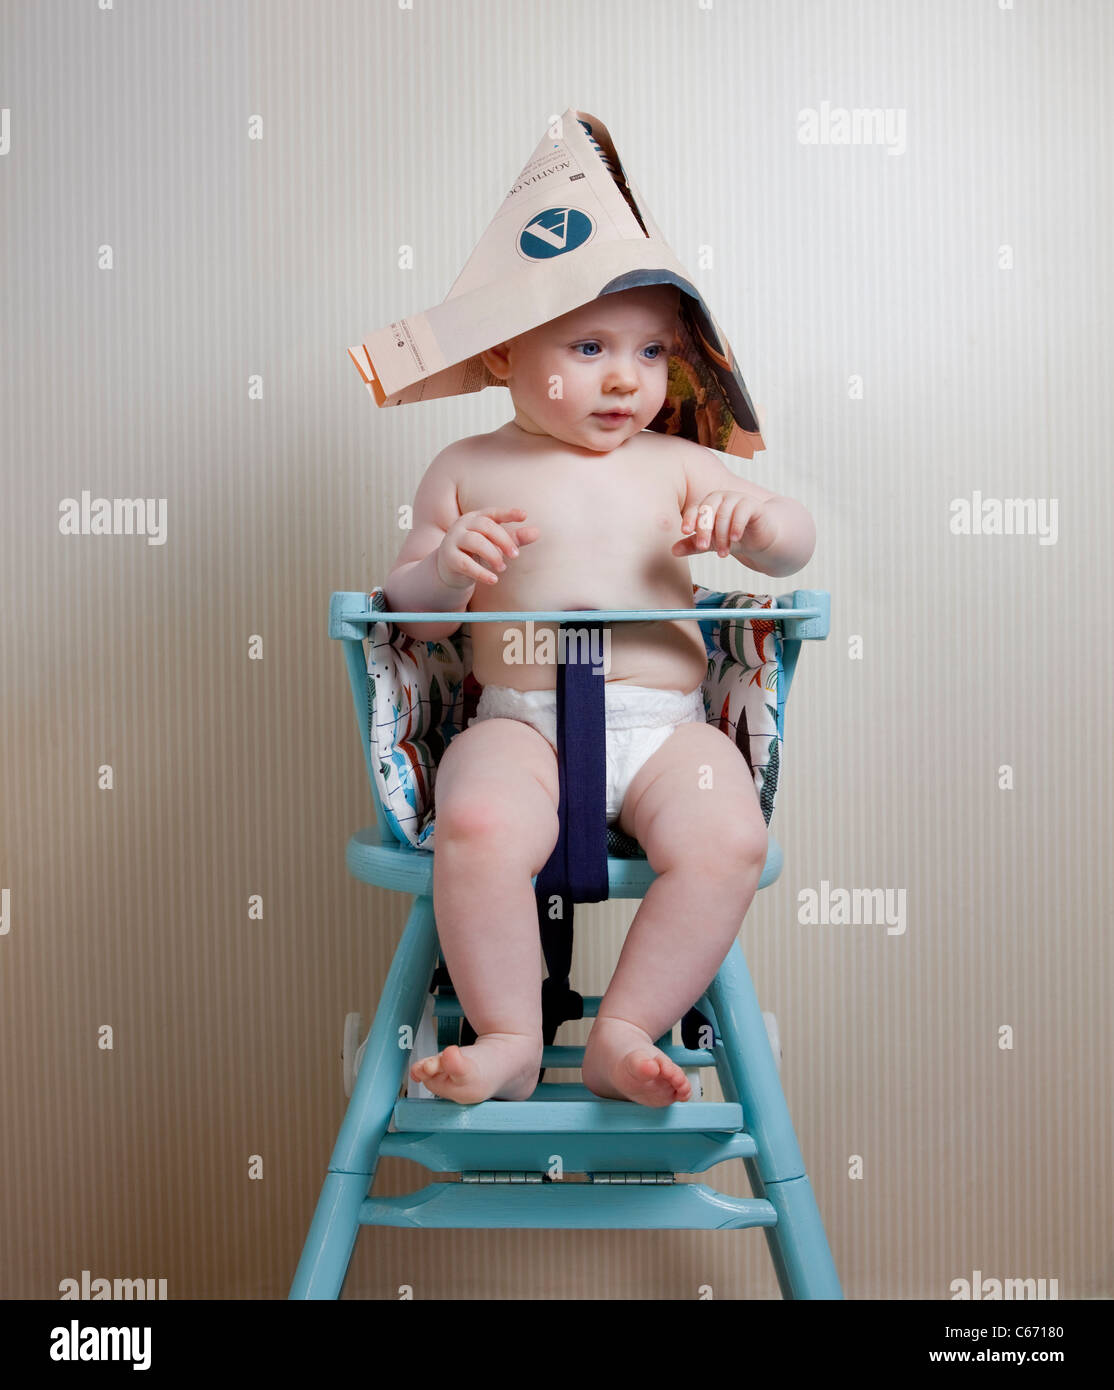 6 months old baby sitting in baby chair wearing a newspaper hat Stock Photo